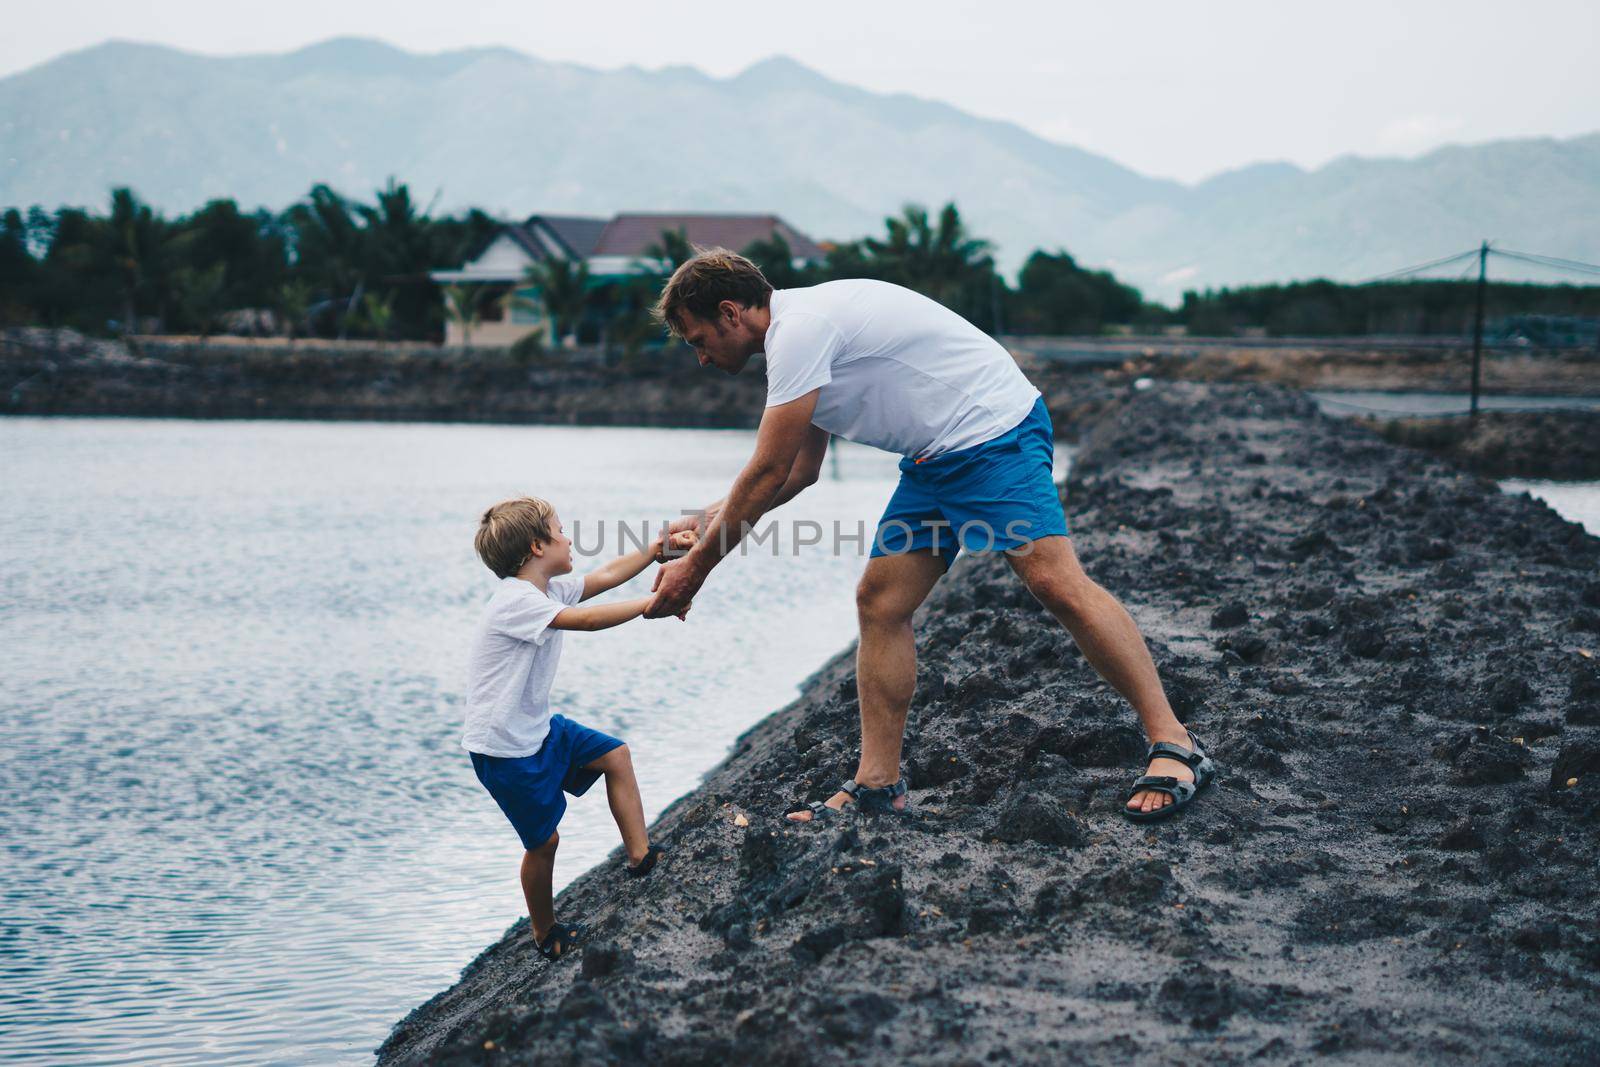 Dad helps son go down to lake water, explains safety rules. Evening, mountain background. Happy childhood fatherhood. Family together walk play. Home natural education, father's day, responsibilities.